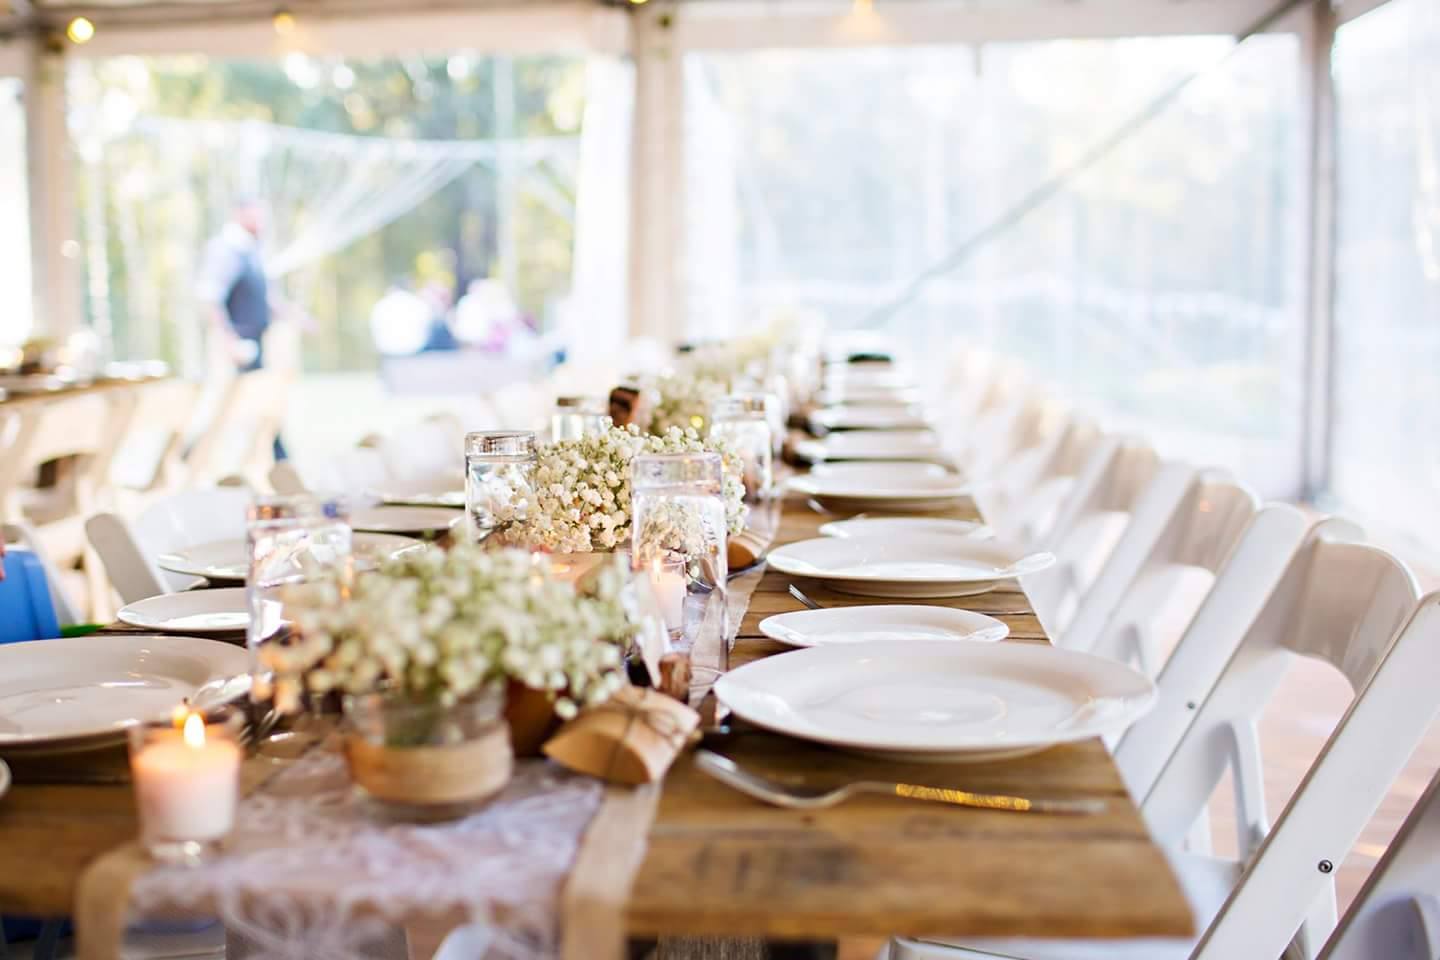 Rustic wedding table at reception with white fold up chairs.